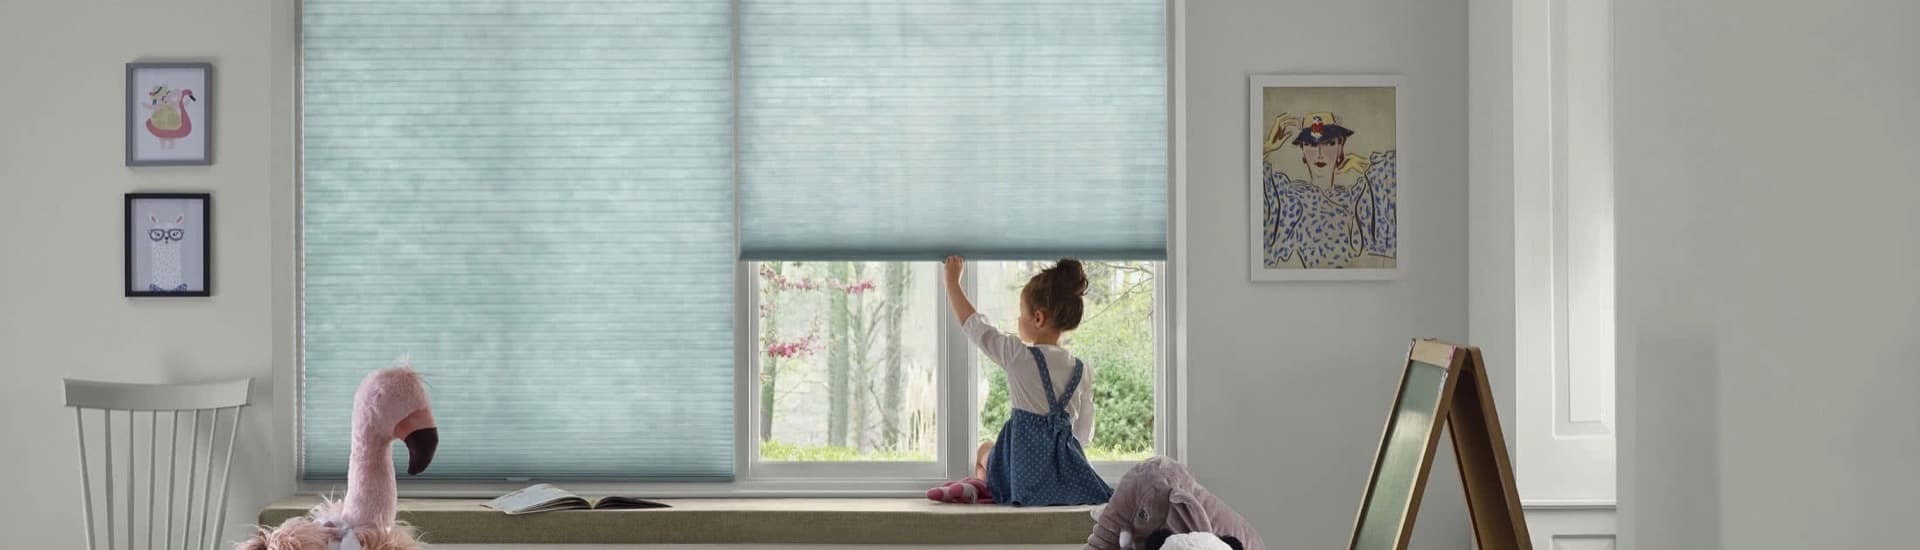 Applause Honeycomb Shades with Child Safe Controls